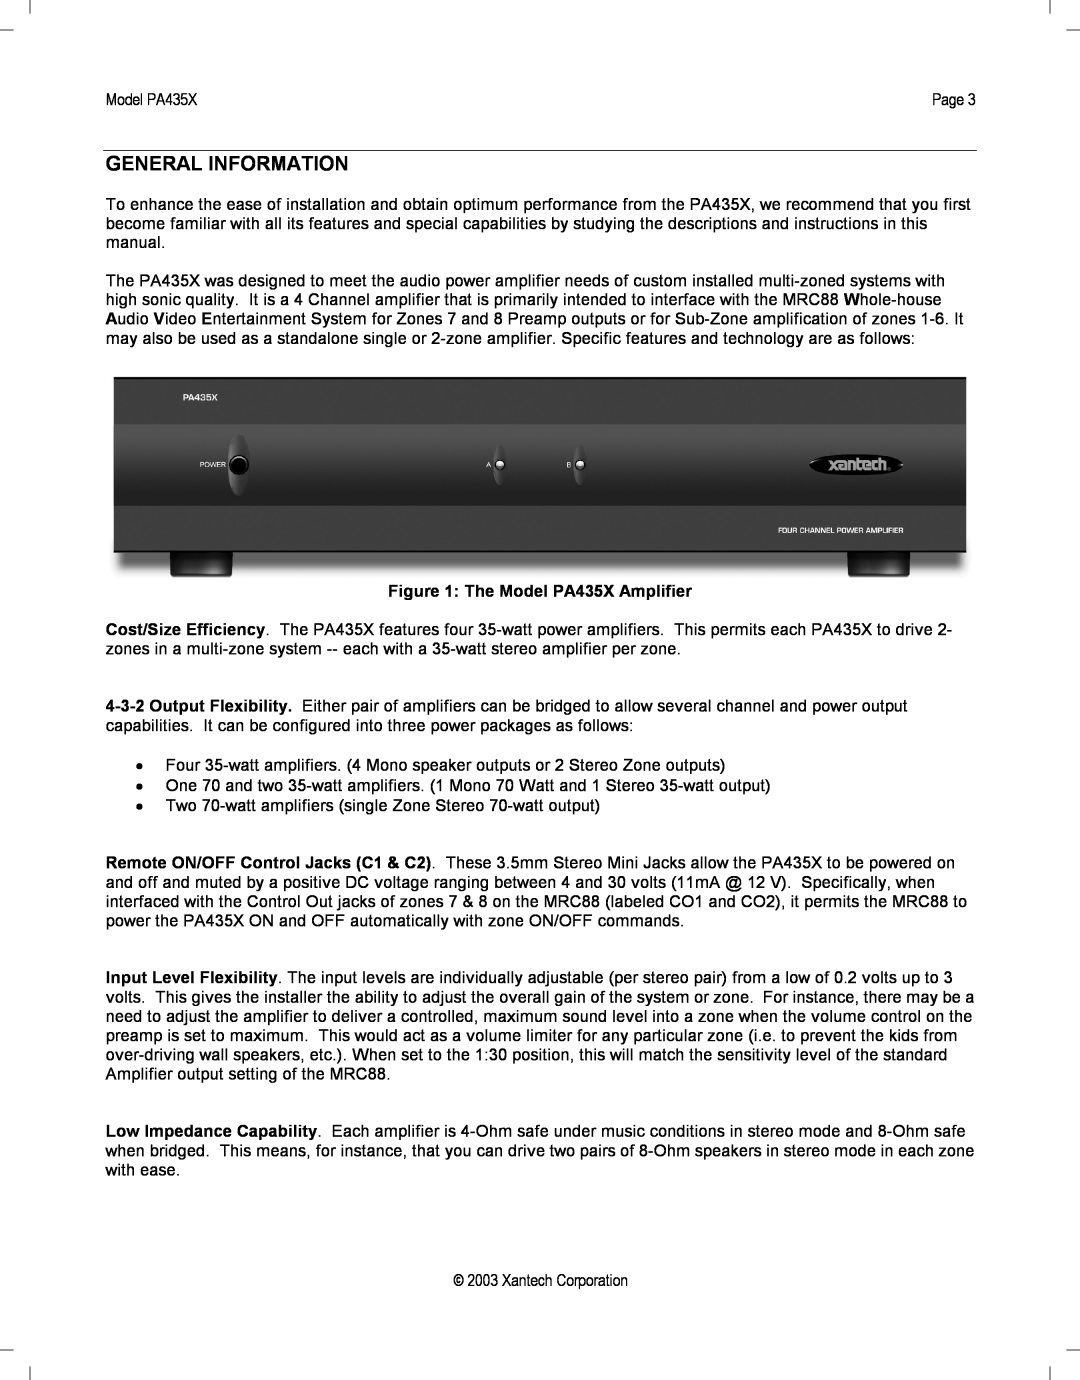 Xantech installation instructions General Information, The Model PA435X Amplifier 